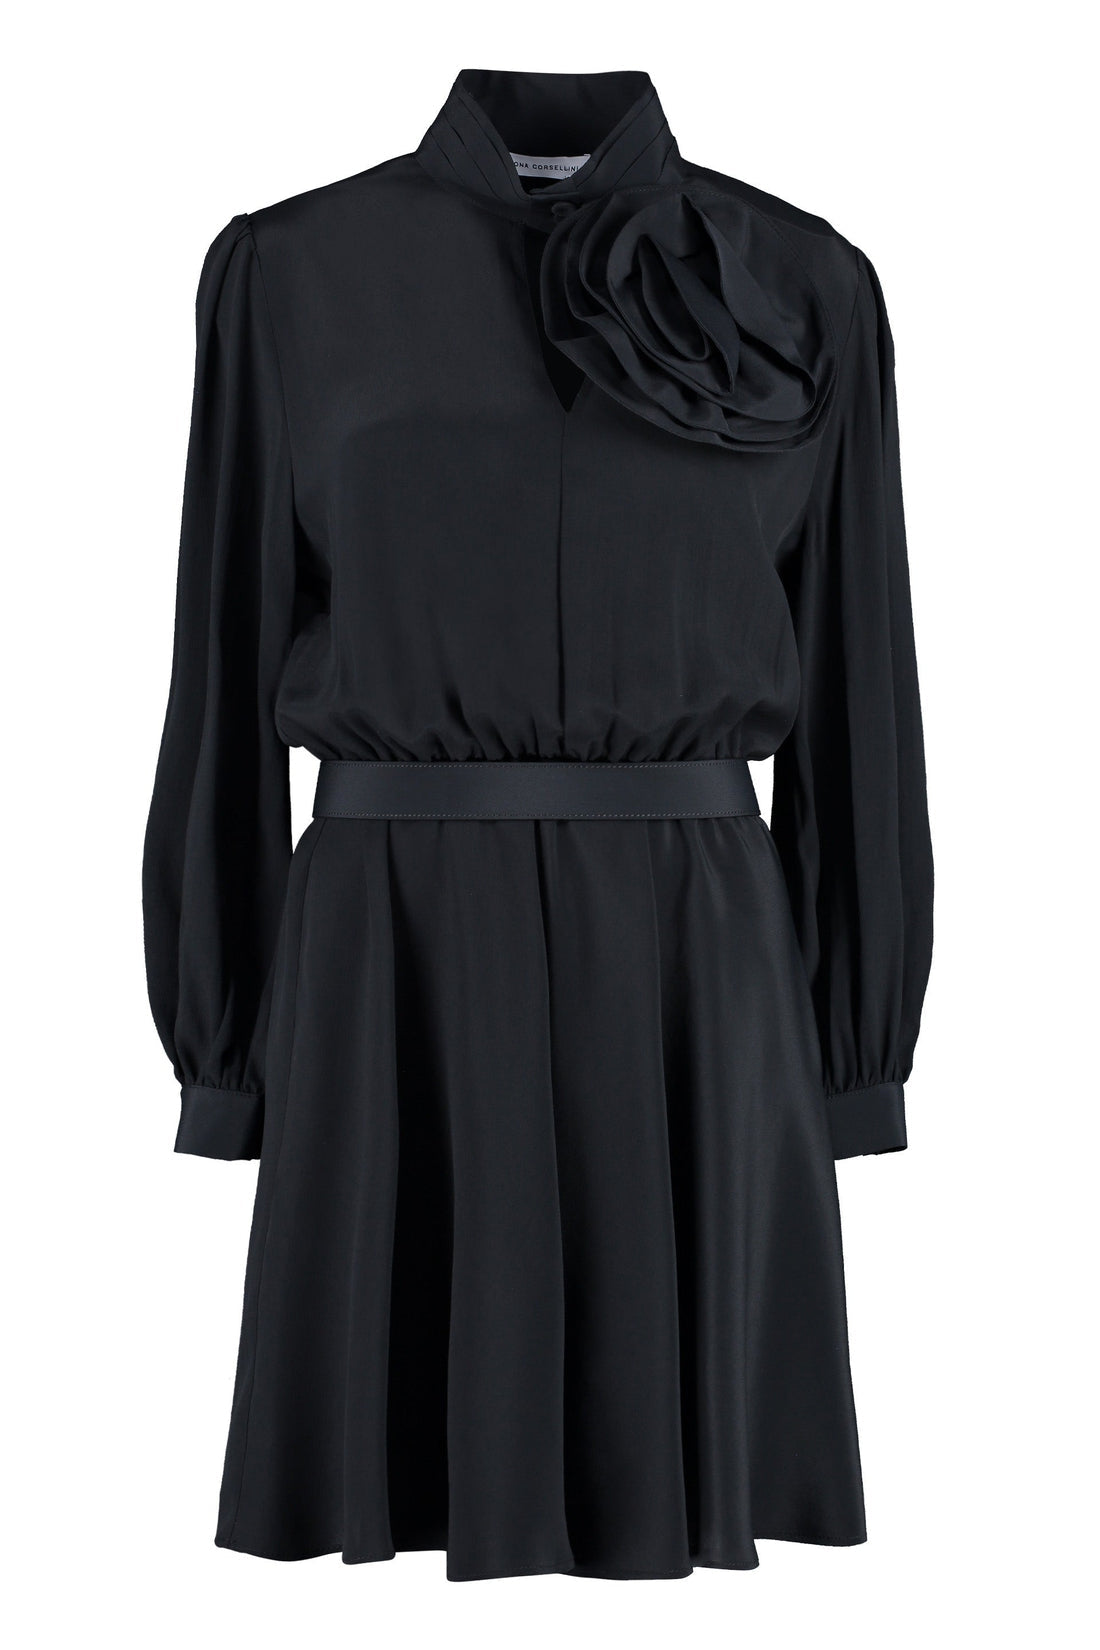 Simona Corsellini-OUTLET-SALE-Belted waist dress-ARCHIVIST